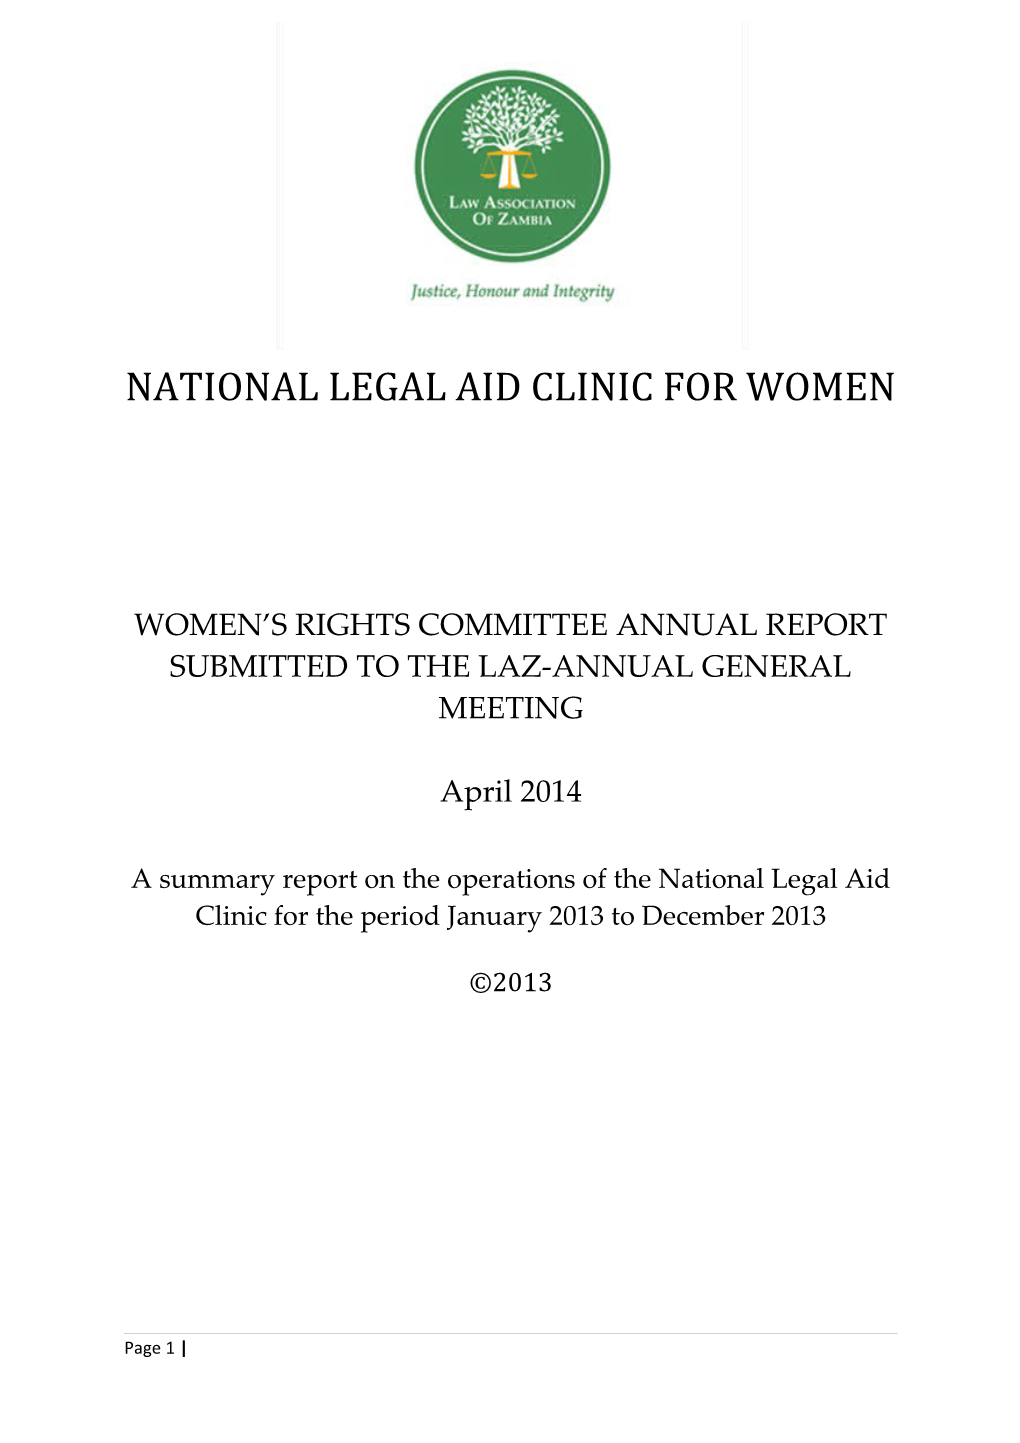 National Legal Aid Clinic for Women